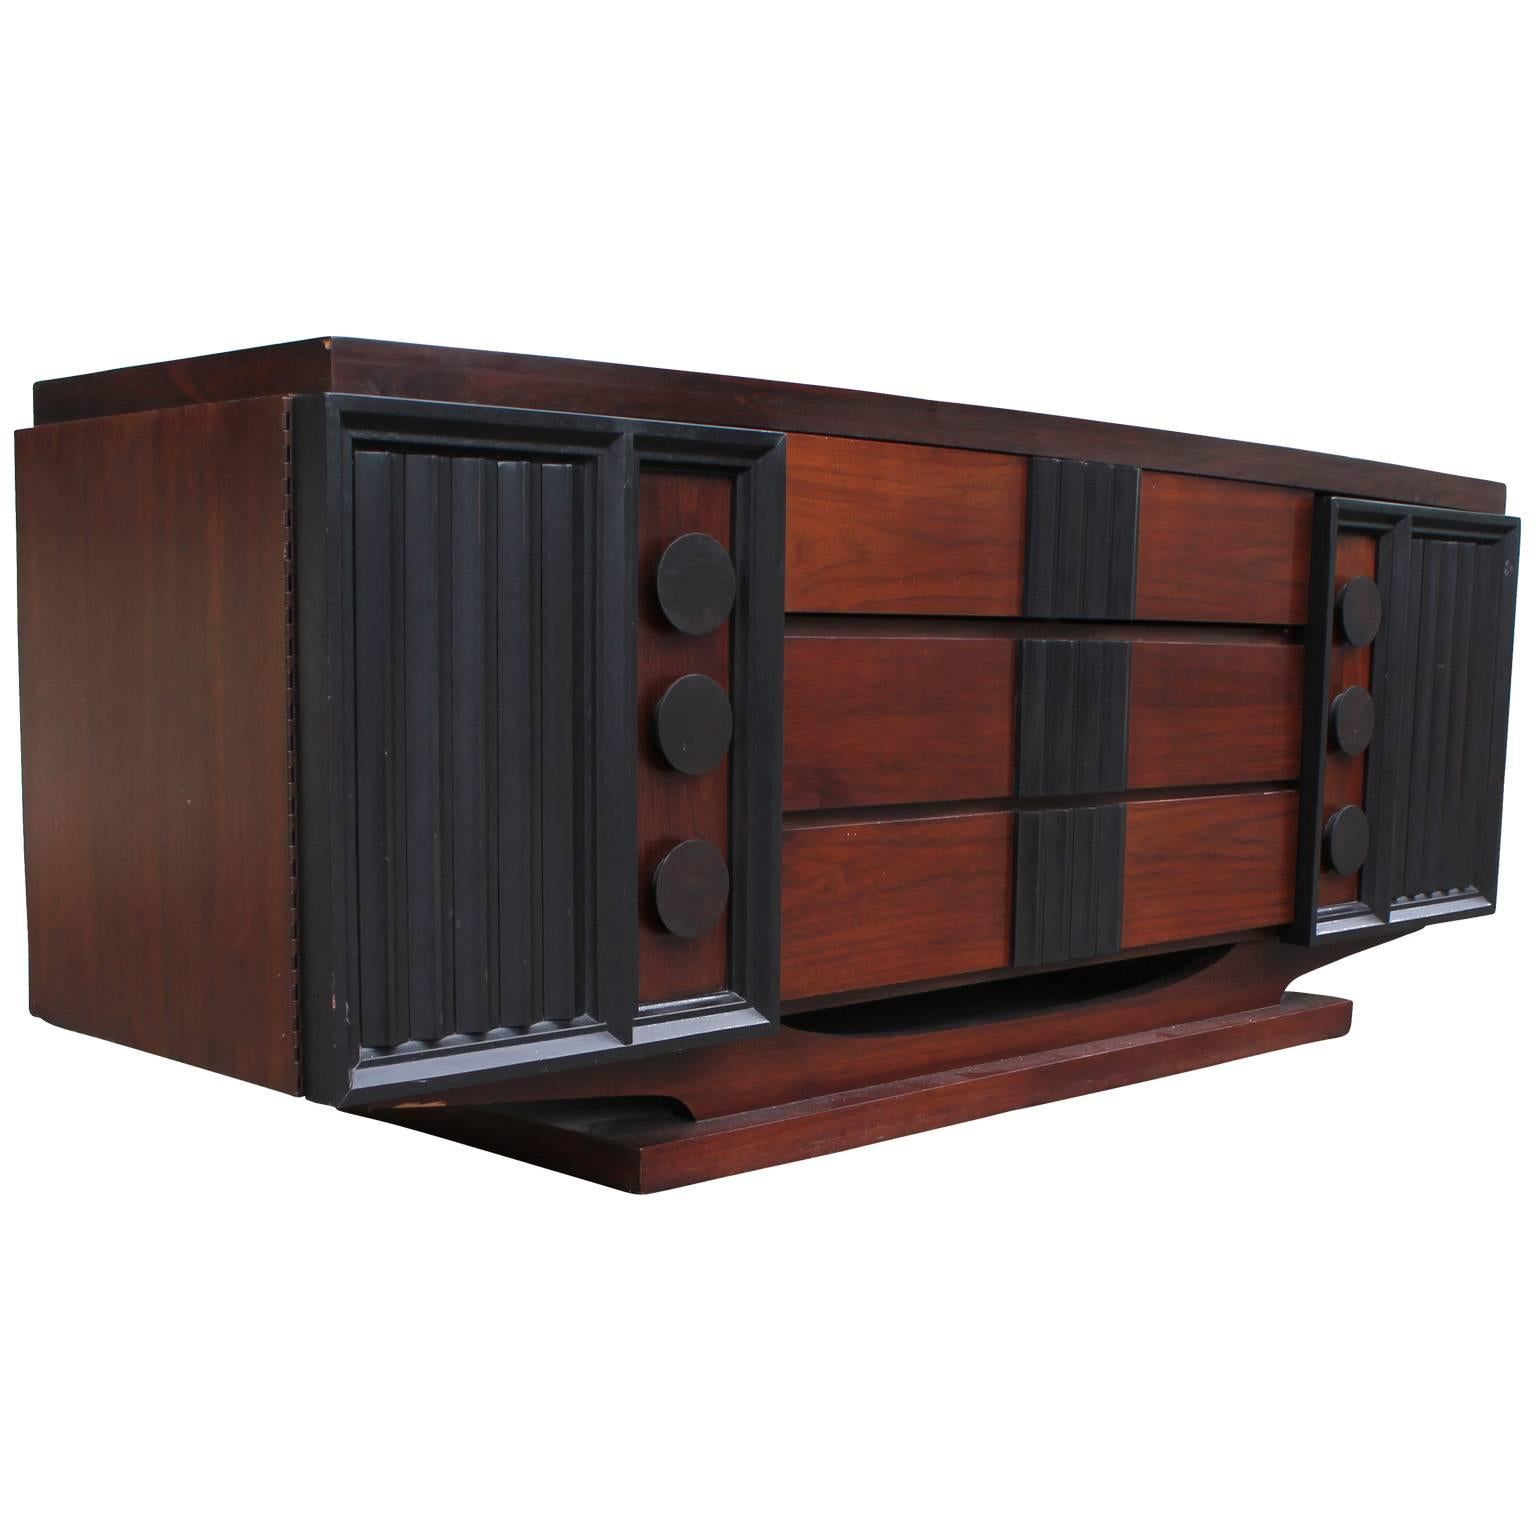 Fabulous sideboard or dresser with tons of visual interest. Sideboard is finished in a two tone walnut and ebony. All sculptural components are in ebony. Cabinet doors on either side open to reveal drawers. Three center drawers provide additional